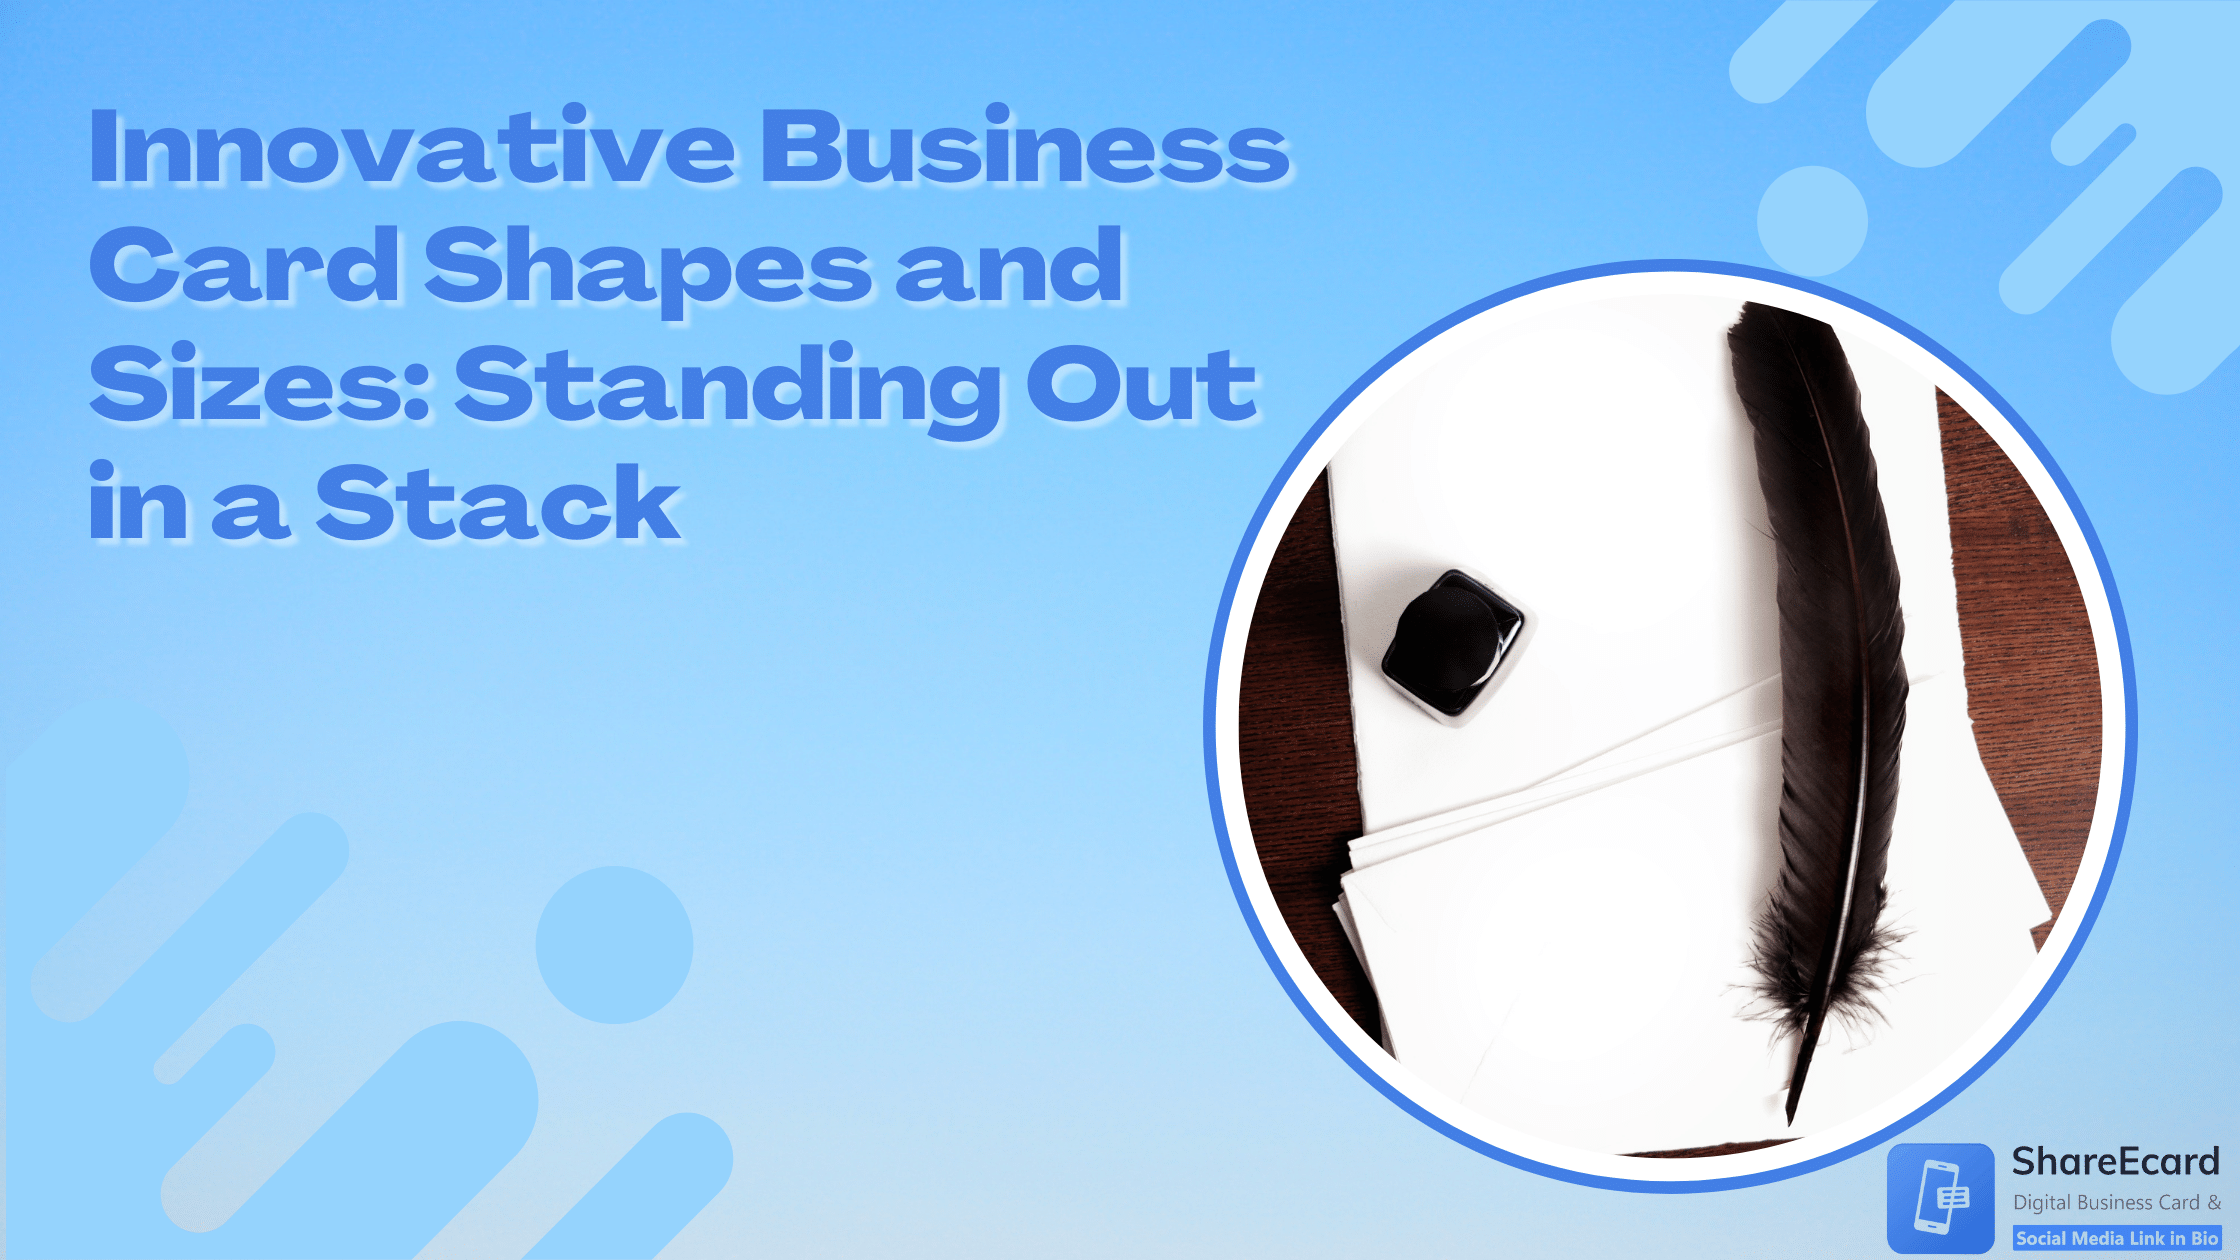 You are currently viewing Innovative Business Card Shapes and Sizes: Standing Out in a Stack